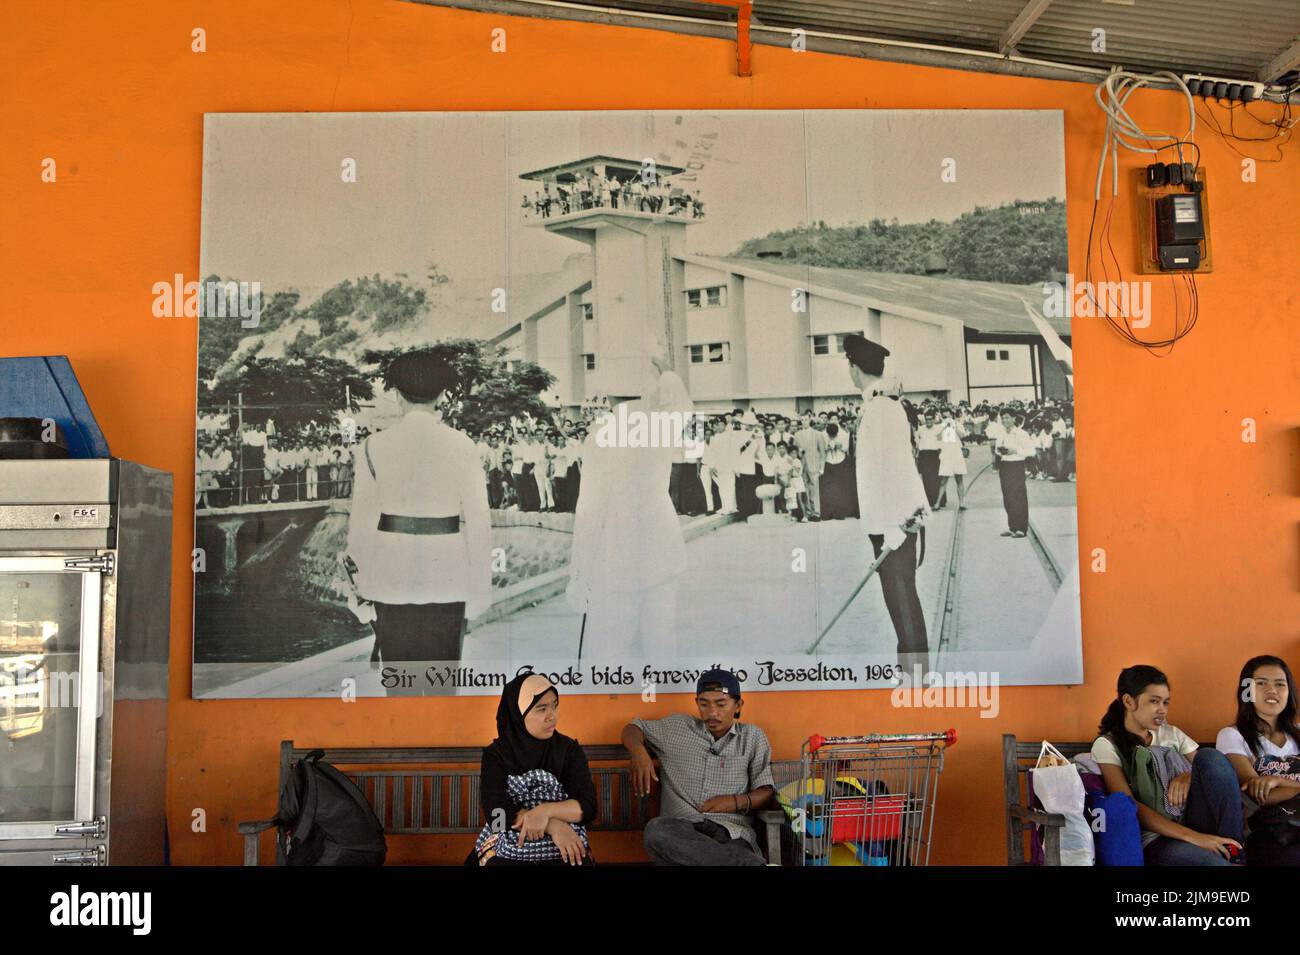 Passengers waiting for transportation as they are sitting in front of a wall where a large photo print of a historical moment is hung at Jesselton Point, a harbour for boats connecting adjacent islands with Kota Kinabalu, which is located in the capital city of Sabah state in Sabah, Malaysia. Stock Photo